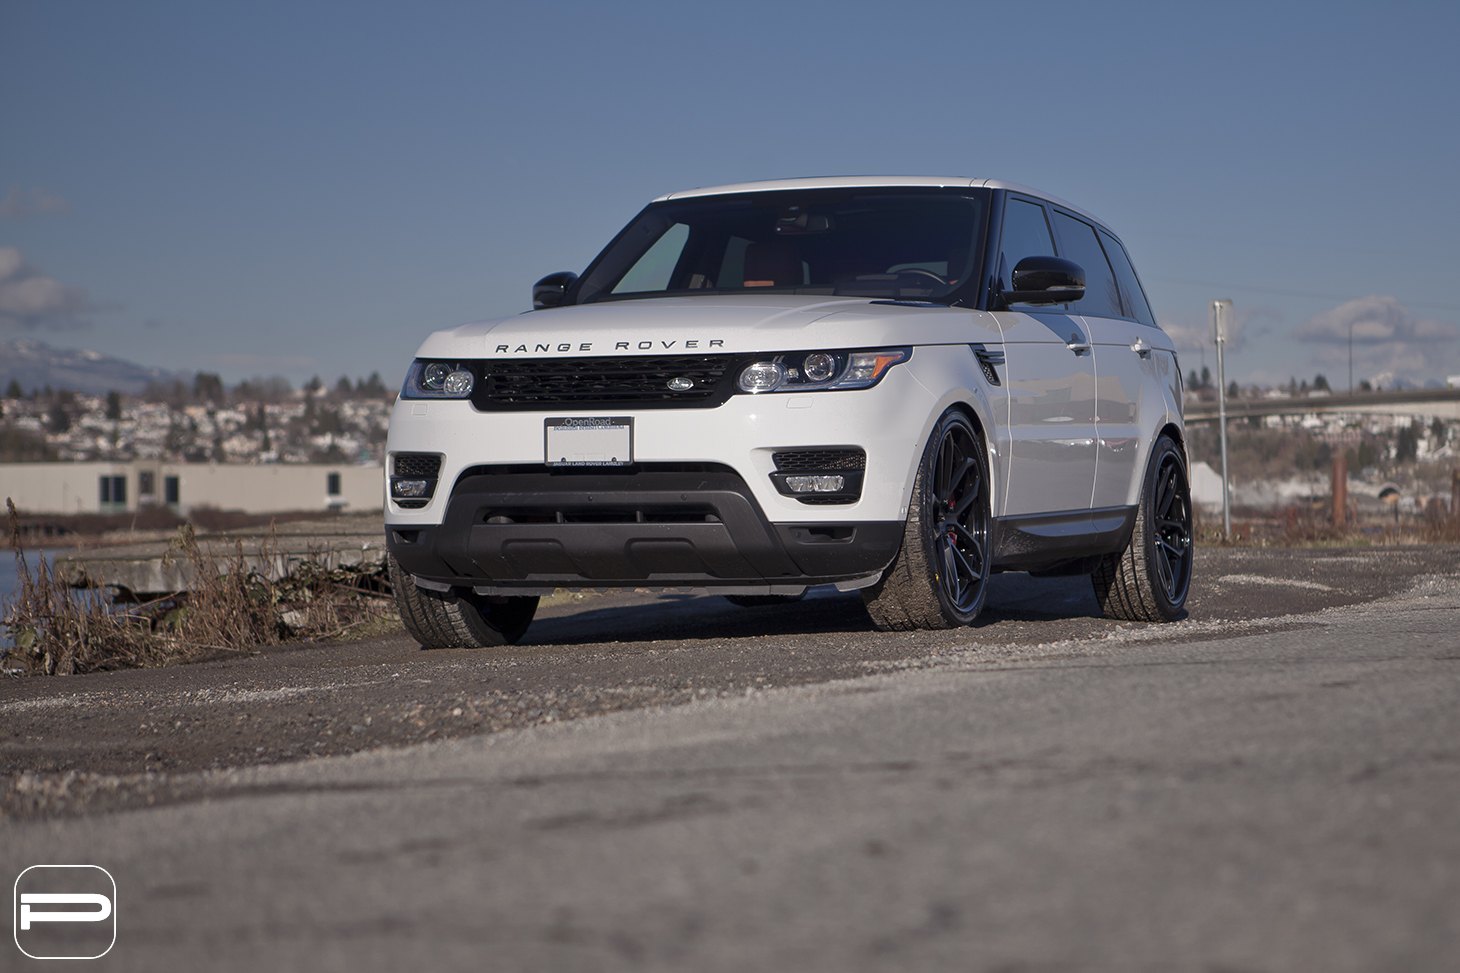 Aftermarket Bumper Guard on White Range Rover Sport - Photo by PUR Wheels